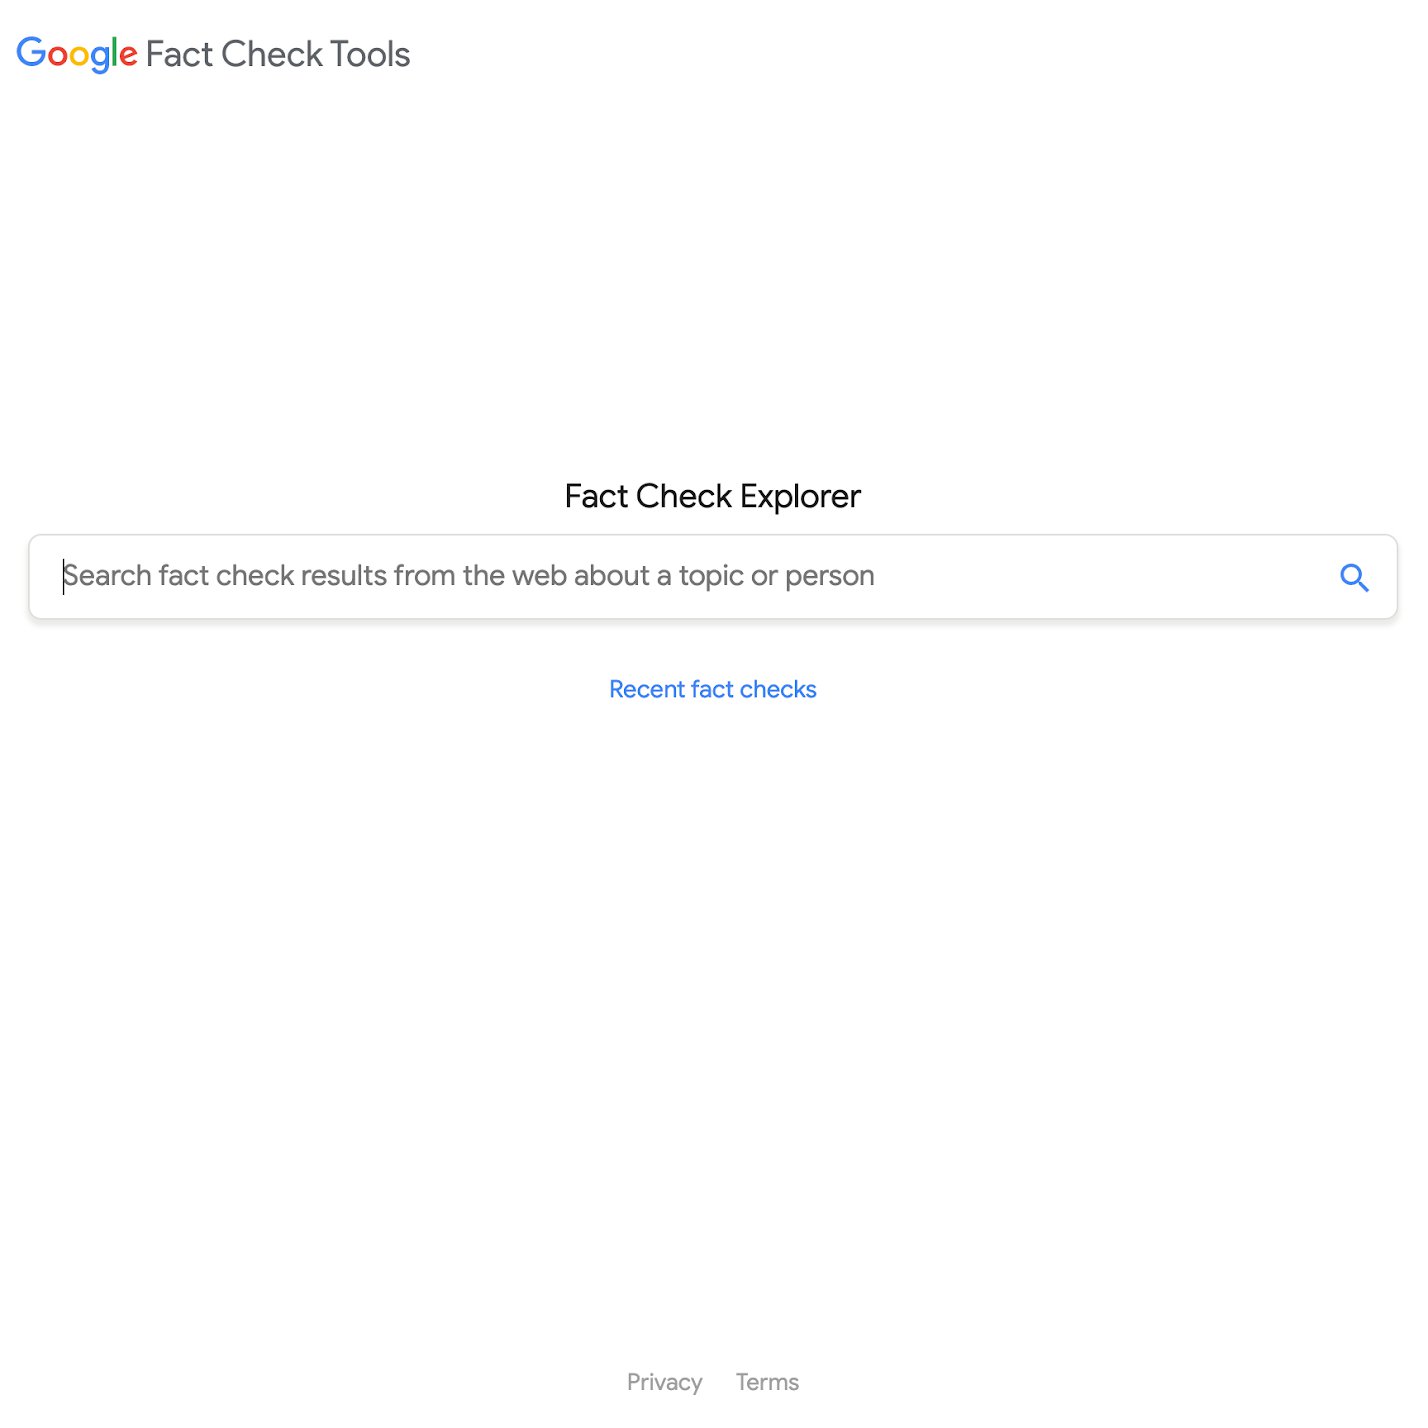 Google_Fact_Check_Tools_lesson_overview_SCcqLr0.jpg